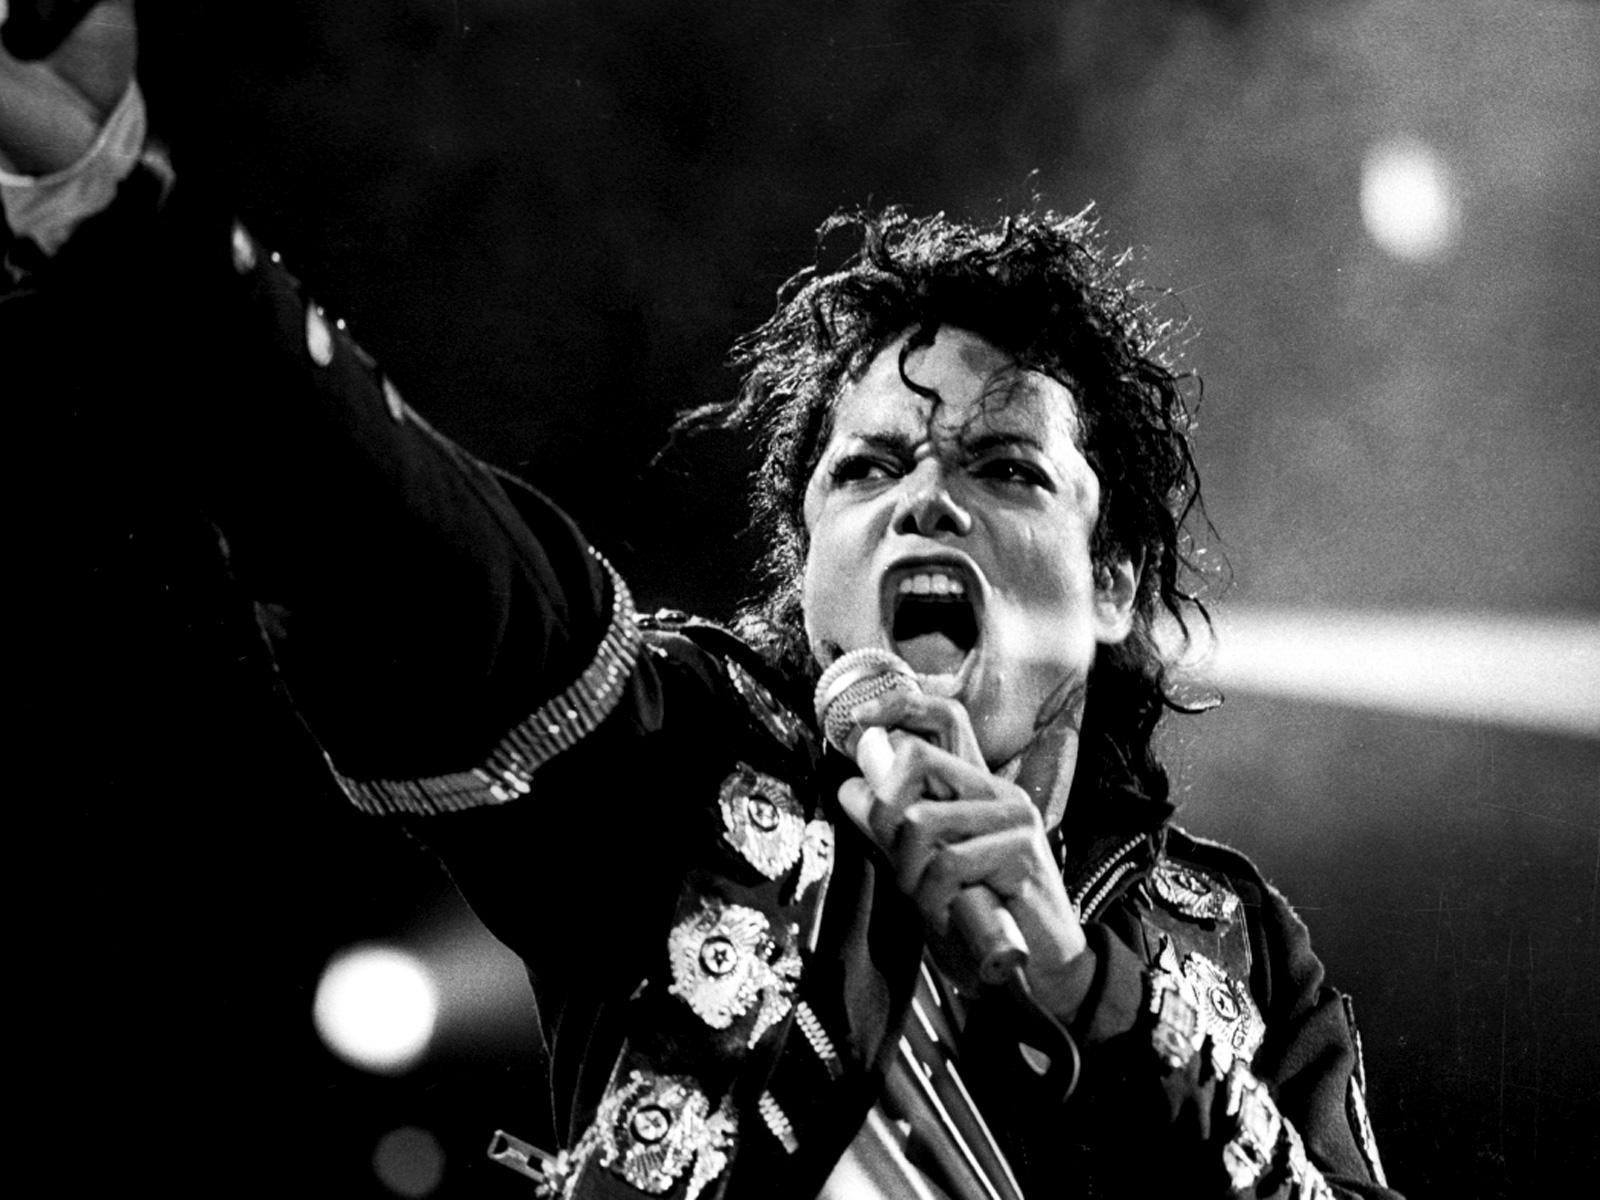 Michael Jackson's “Thriller” is Spotify's most popular